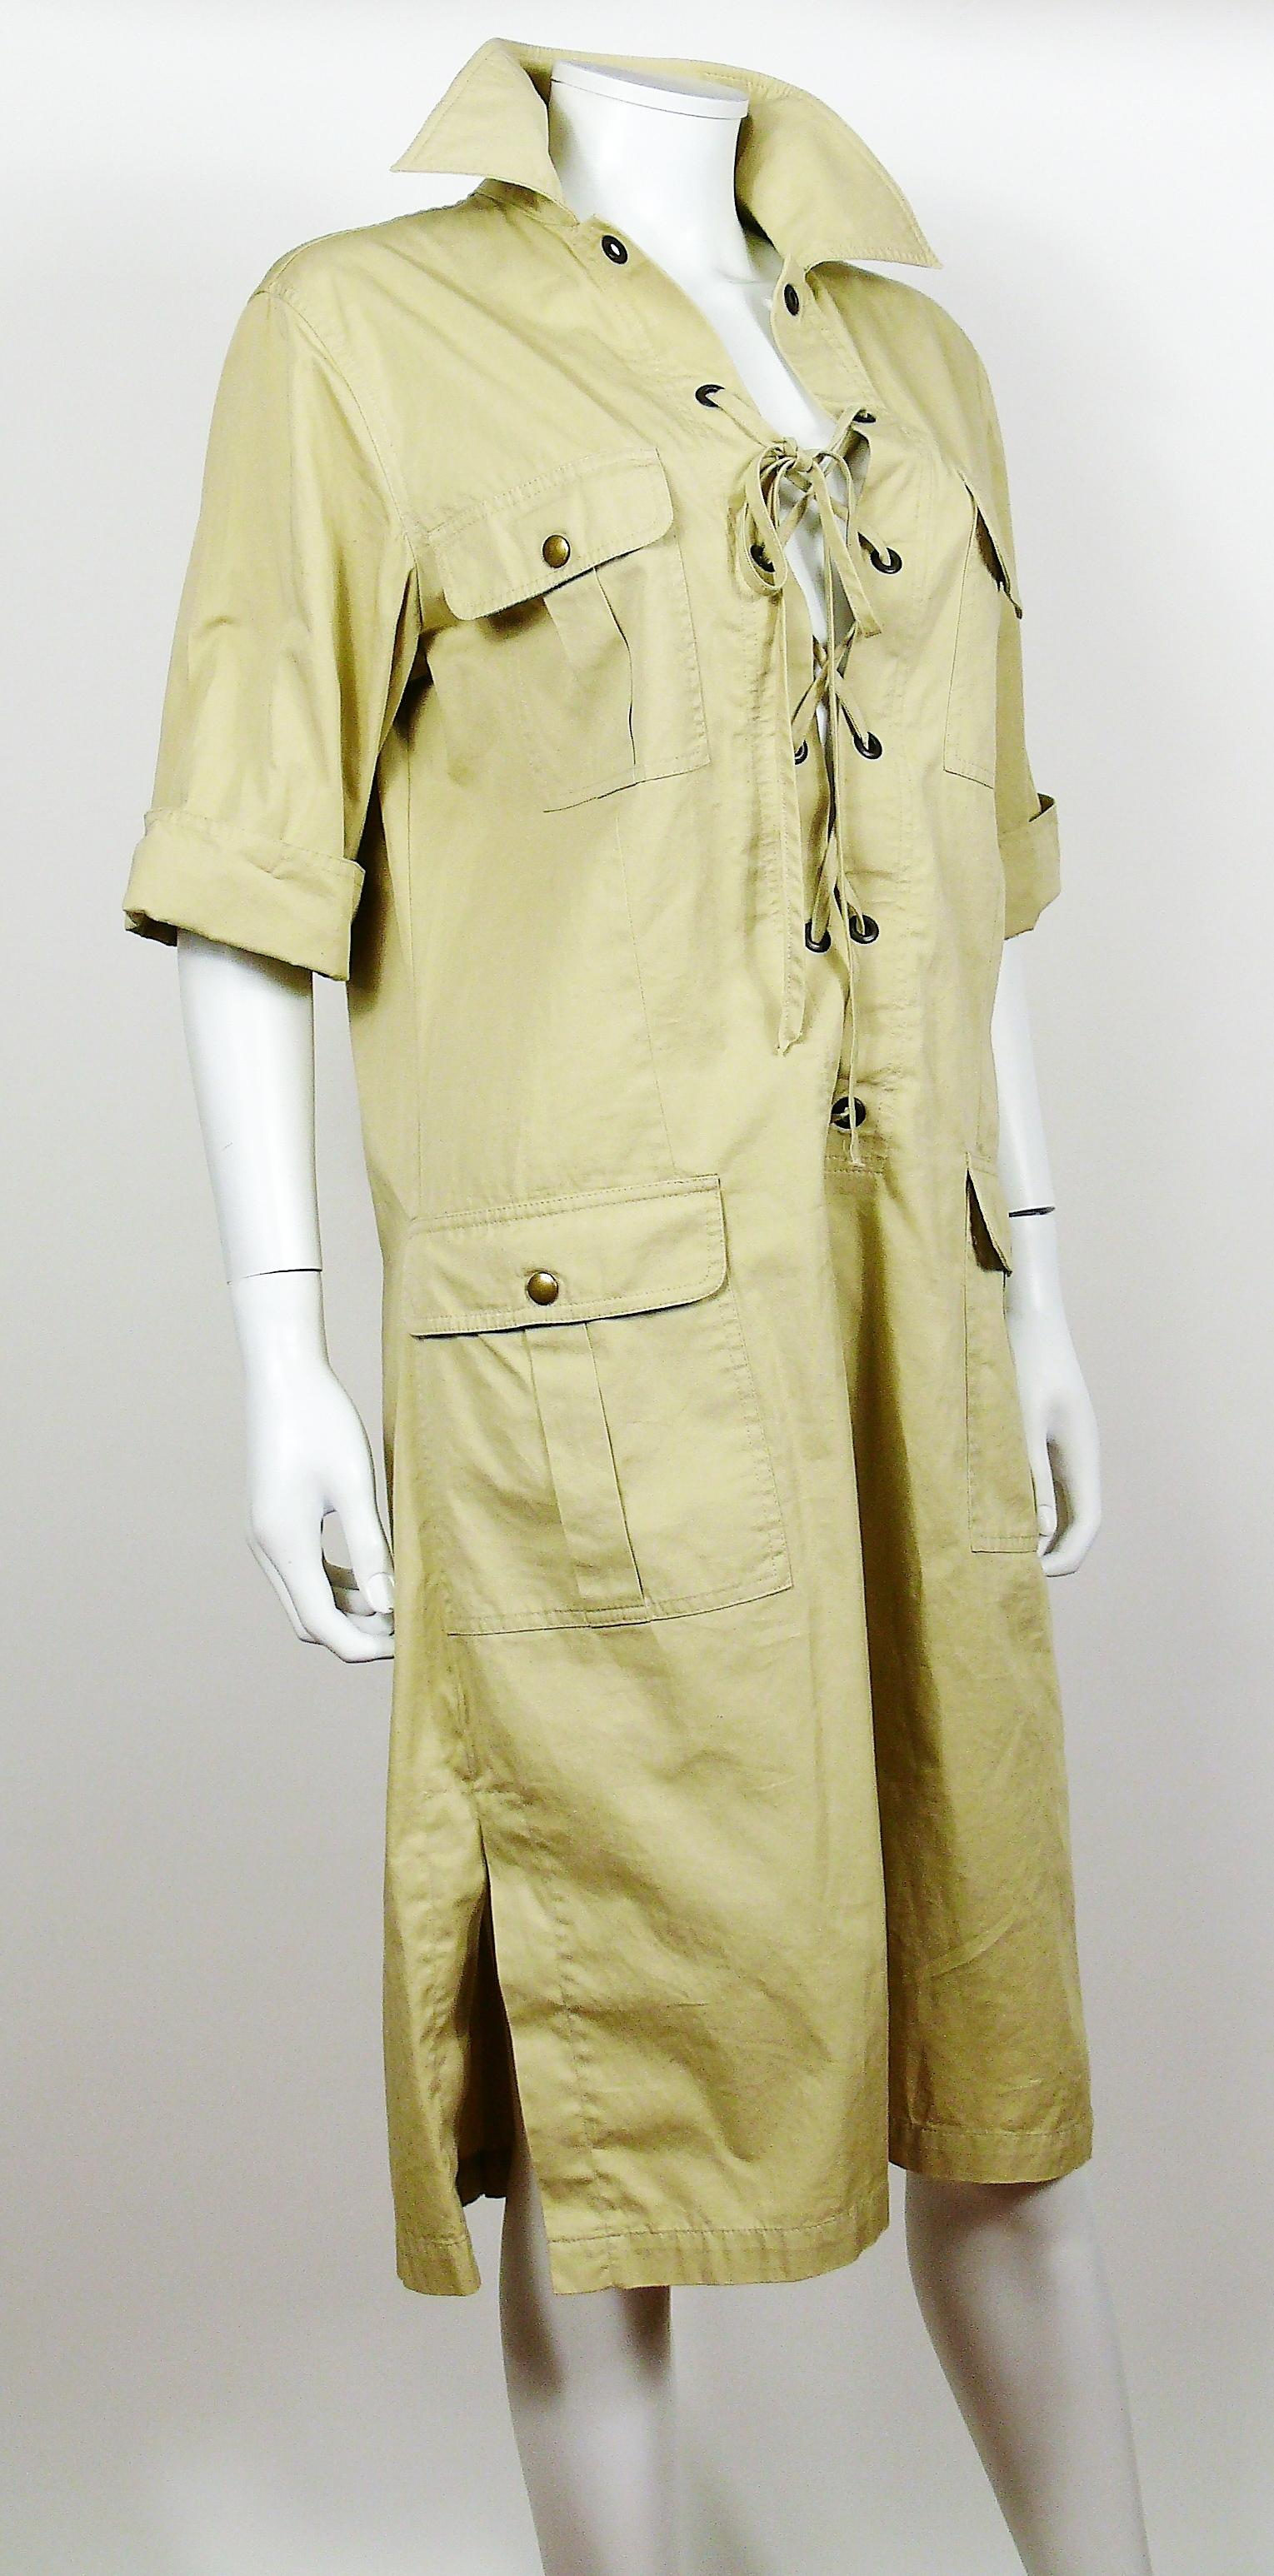 YVES SAINT LAURENT vintage iconic SAFARI dress.

This dress features :
- Lace-up front construction with metal eyelets and matching fabric rope.
- 4 front pockets with snap button closure.
- Side slits.
- Half length sleeves.
- Unlined.

Label reads